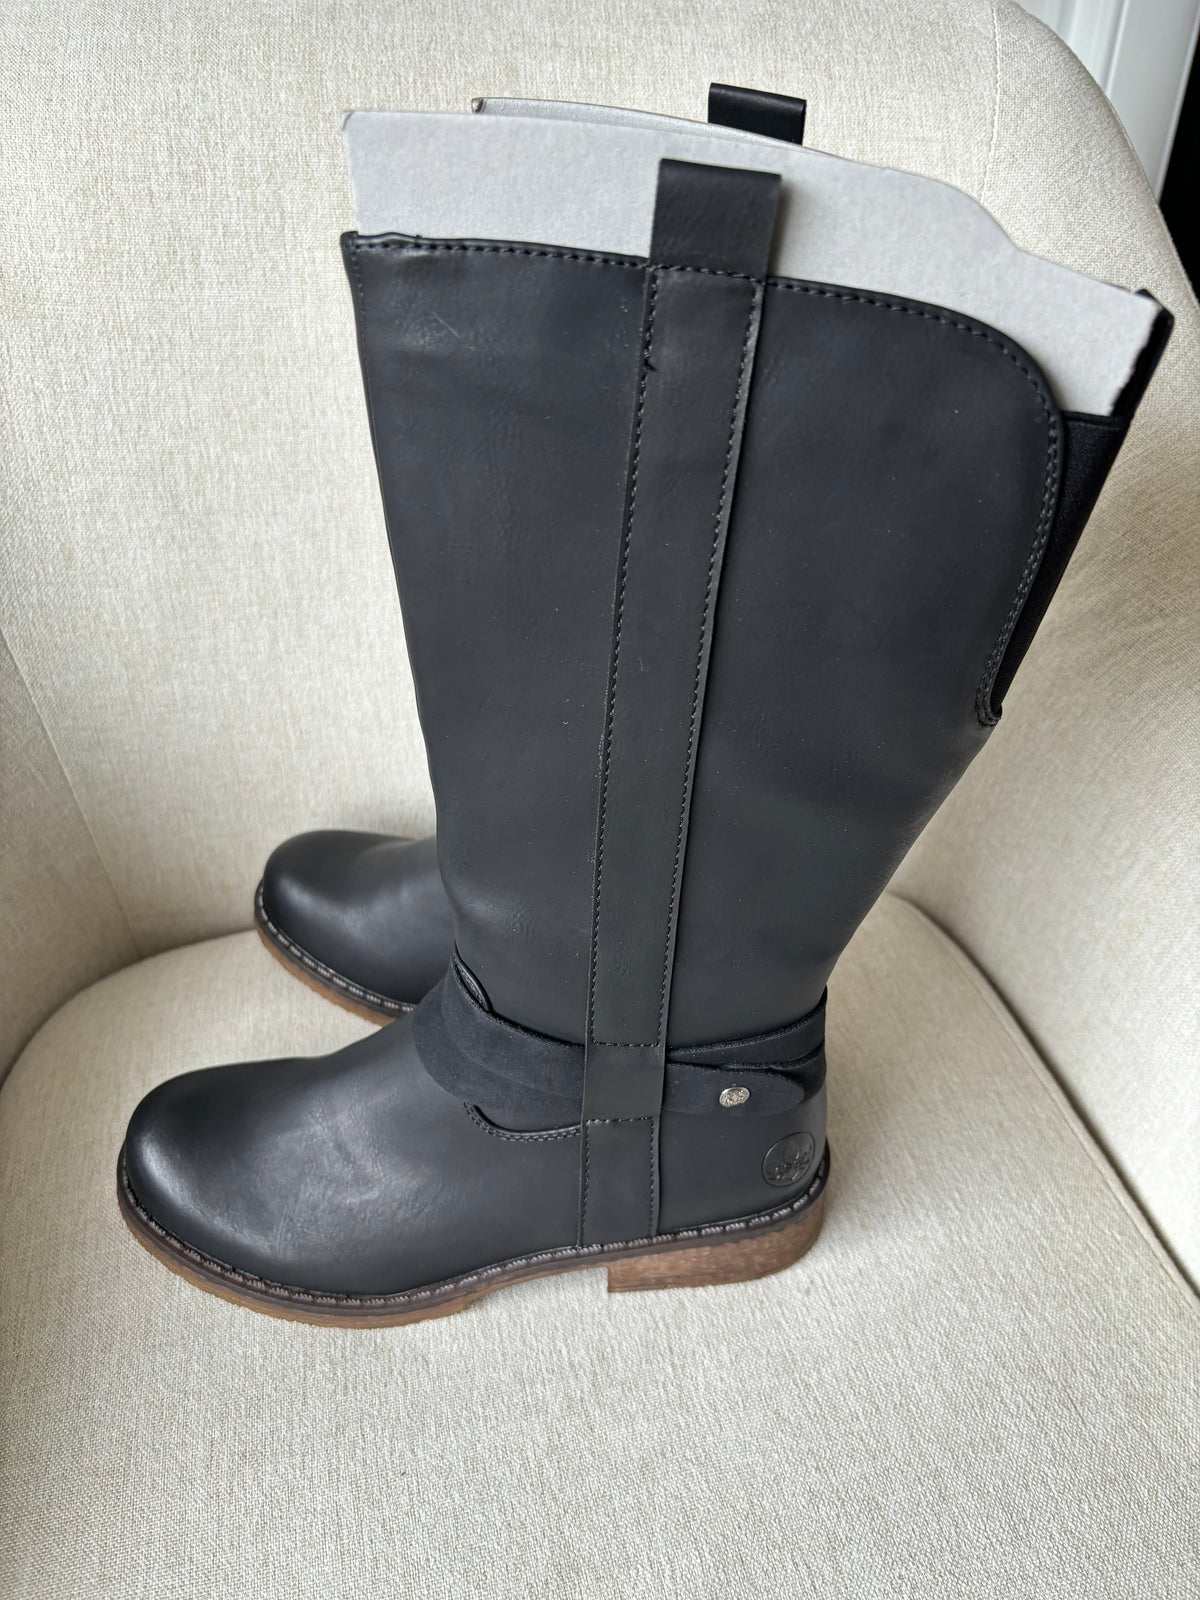 Black Zip up Boots by Rieker